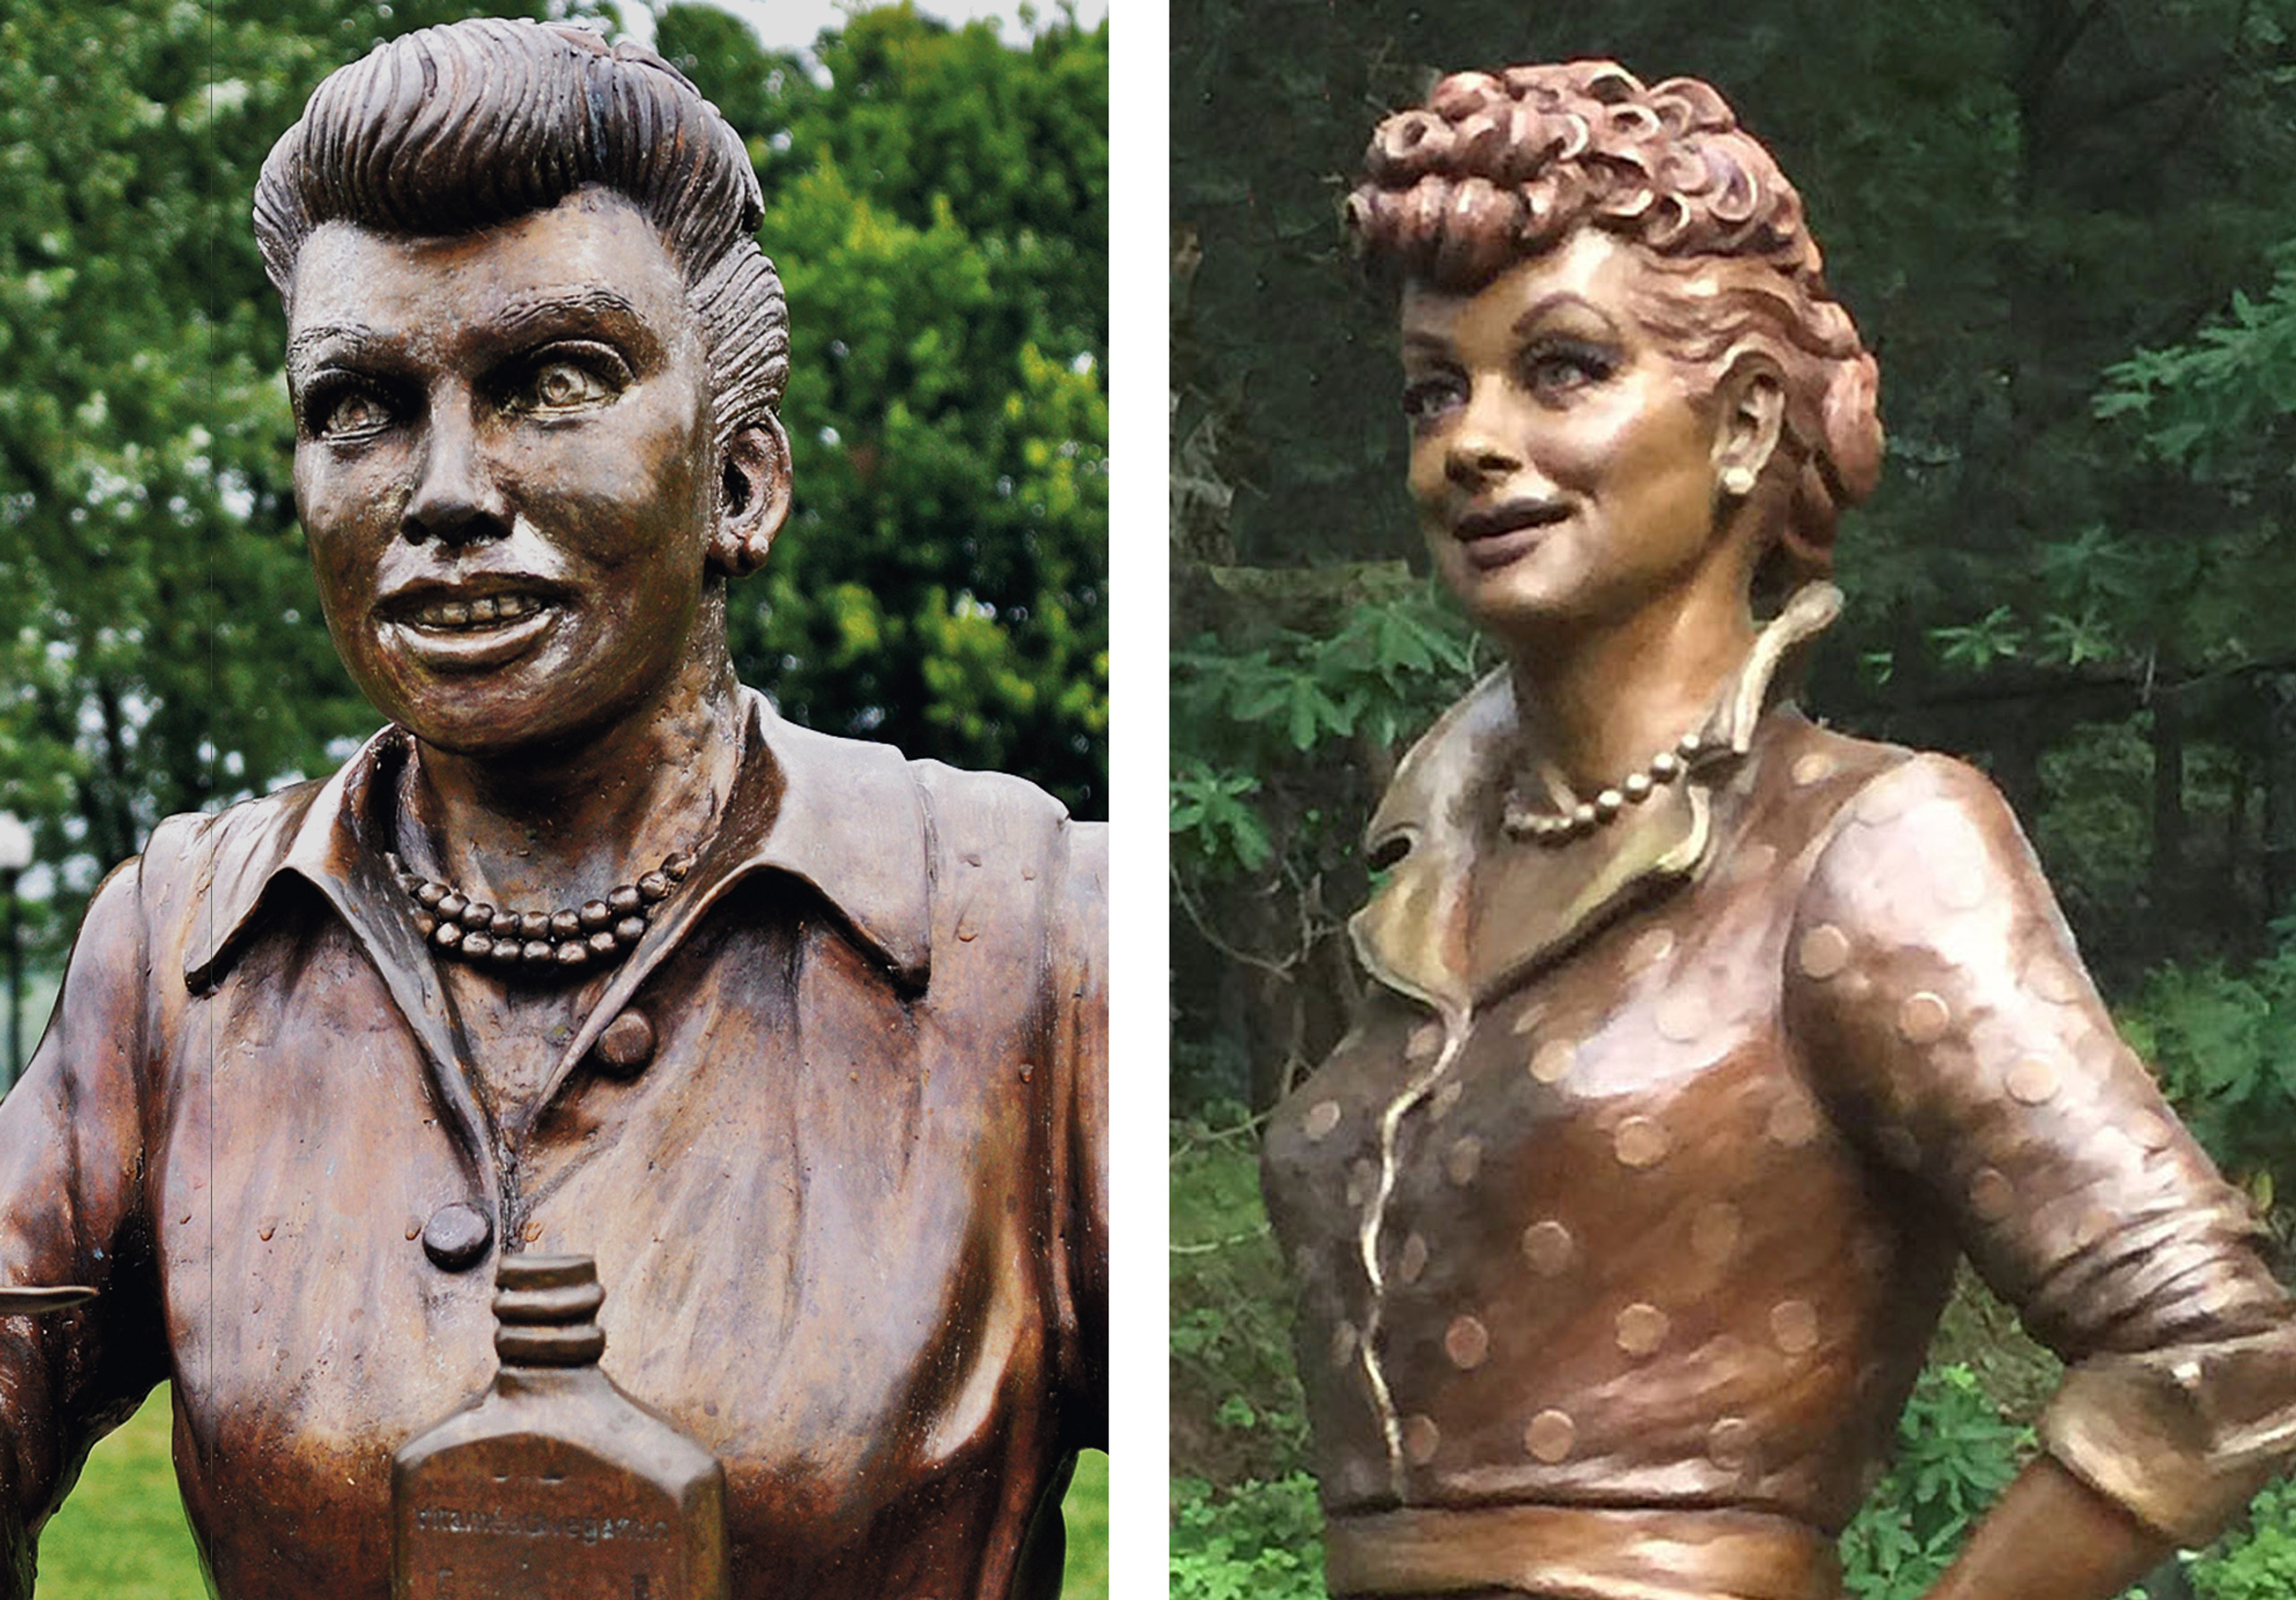 <i>Left</i>: The bronze sculpture of Lucille Ball by Dave Poulin, seen at the Lucille Ball Memorial Park in Celoron, N.Y.. in Aug. 2012; <i>Right</i> the bronze sculpture of Lucille Ball by Carolyn D. Palmer, unveiled at the Lucille Ball Memorial Park in Celeron, N.Y., on Aug. 6, 2016. (The Post-Journal/AP; Handout/Reuters)